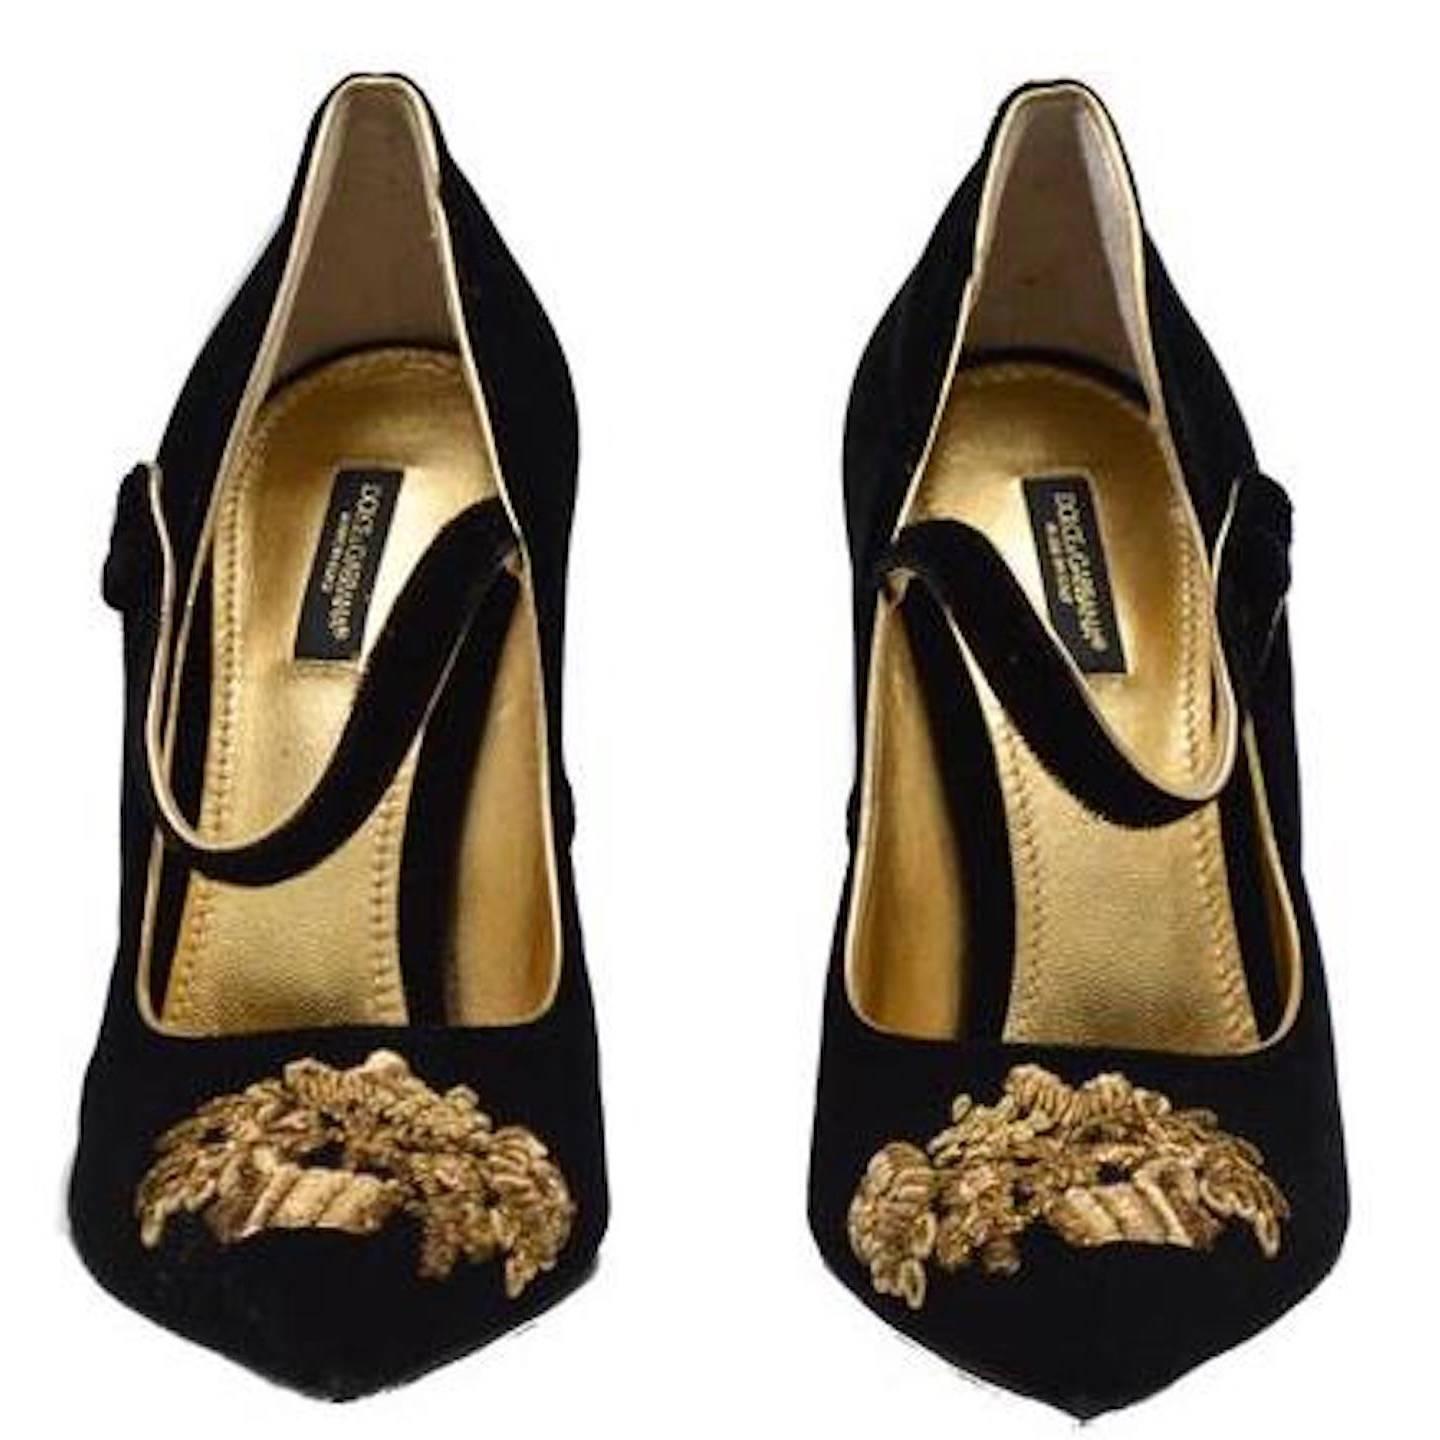 NEW! Dolce & Gabbana Runway Black Gold Evening Mary Jane Heels in Box For Sale